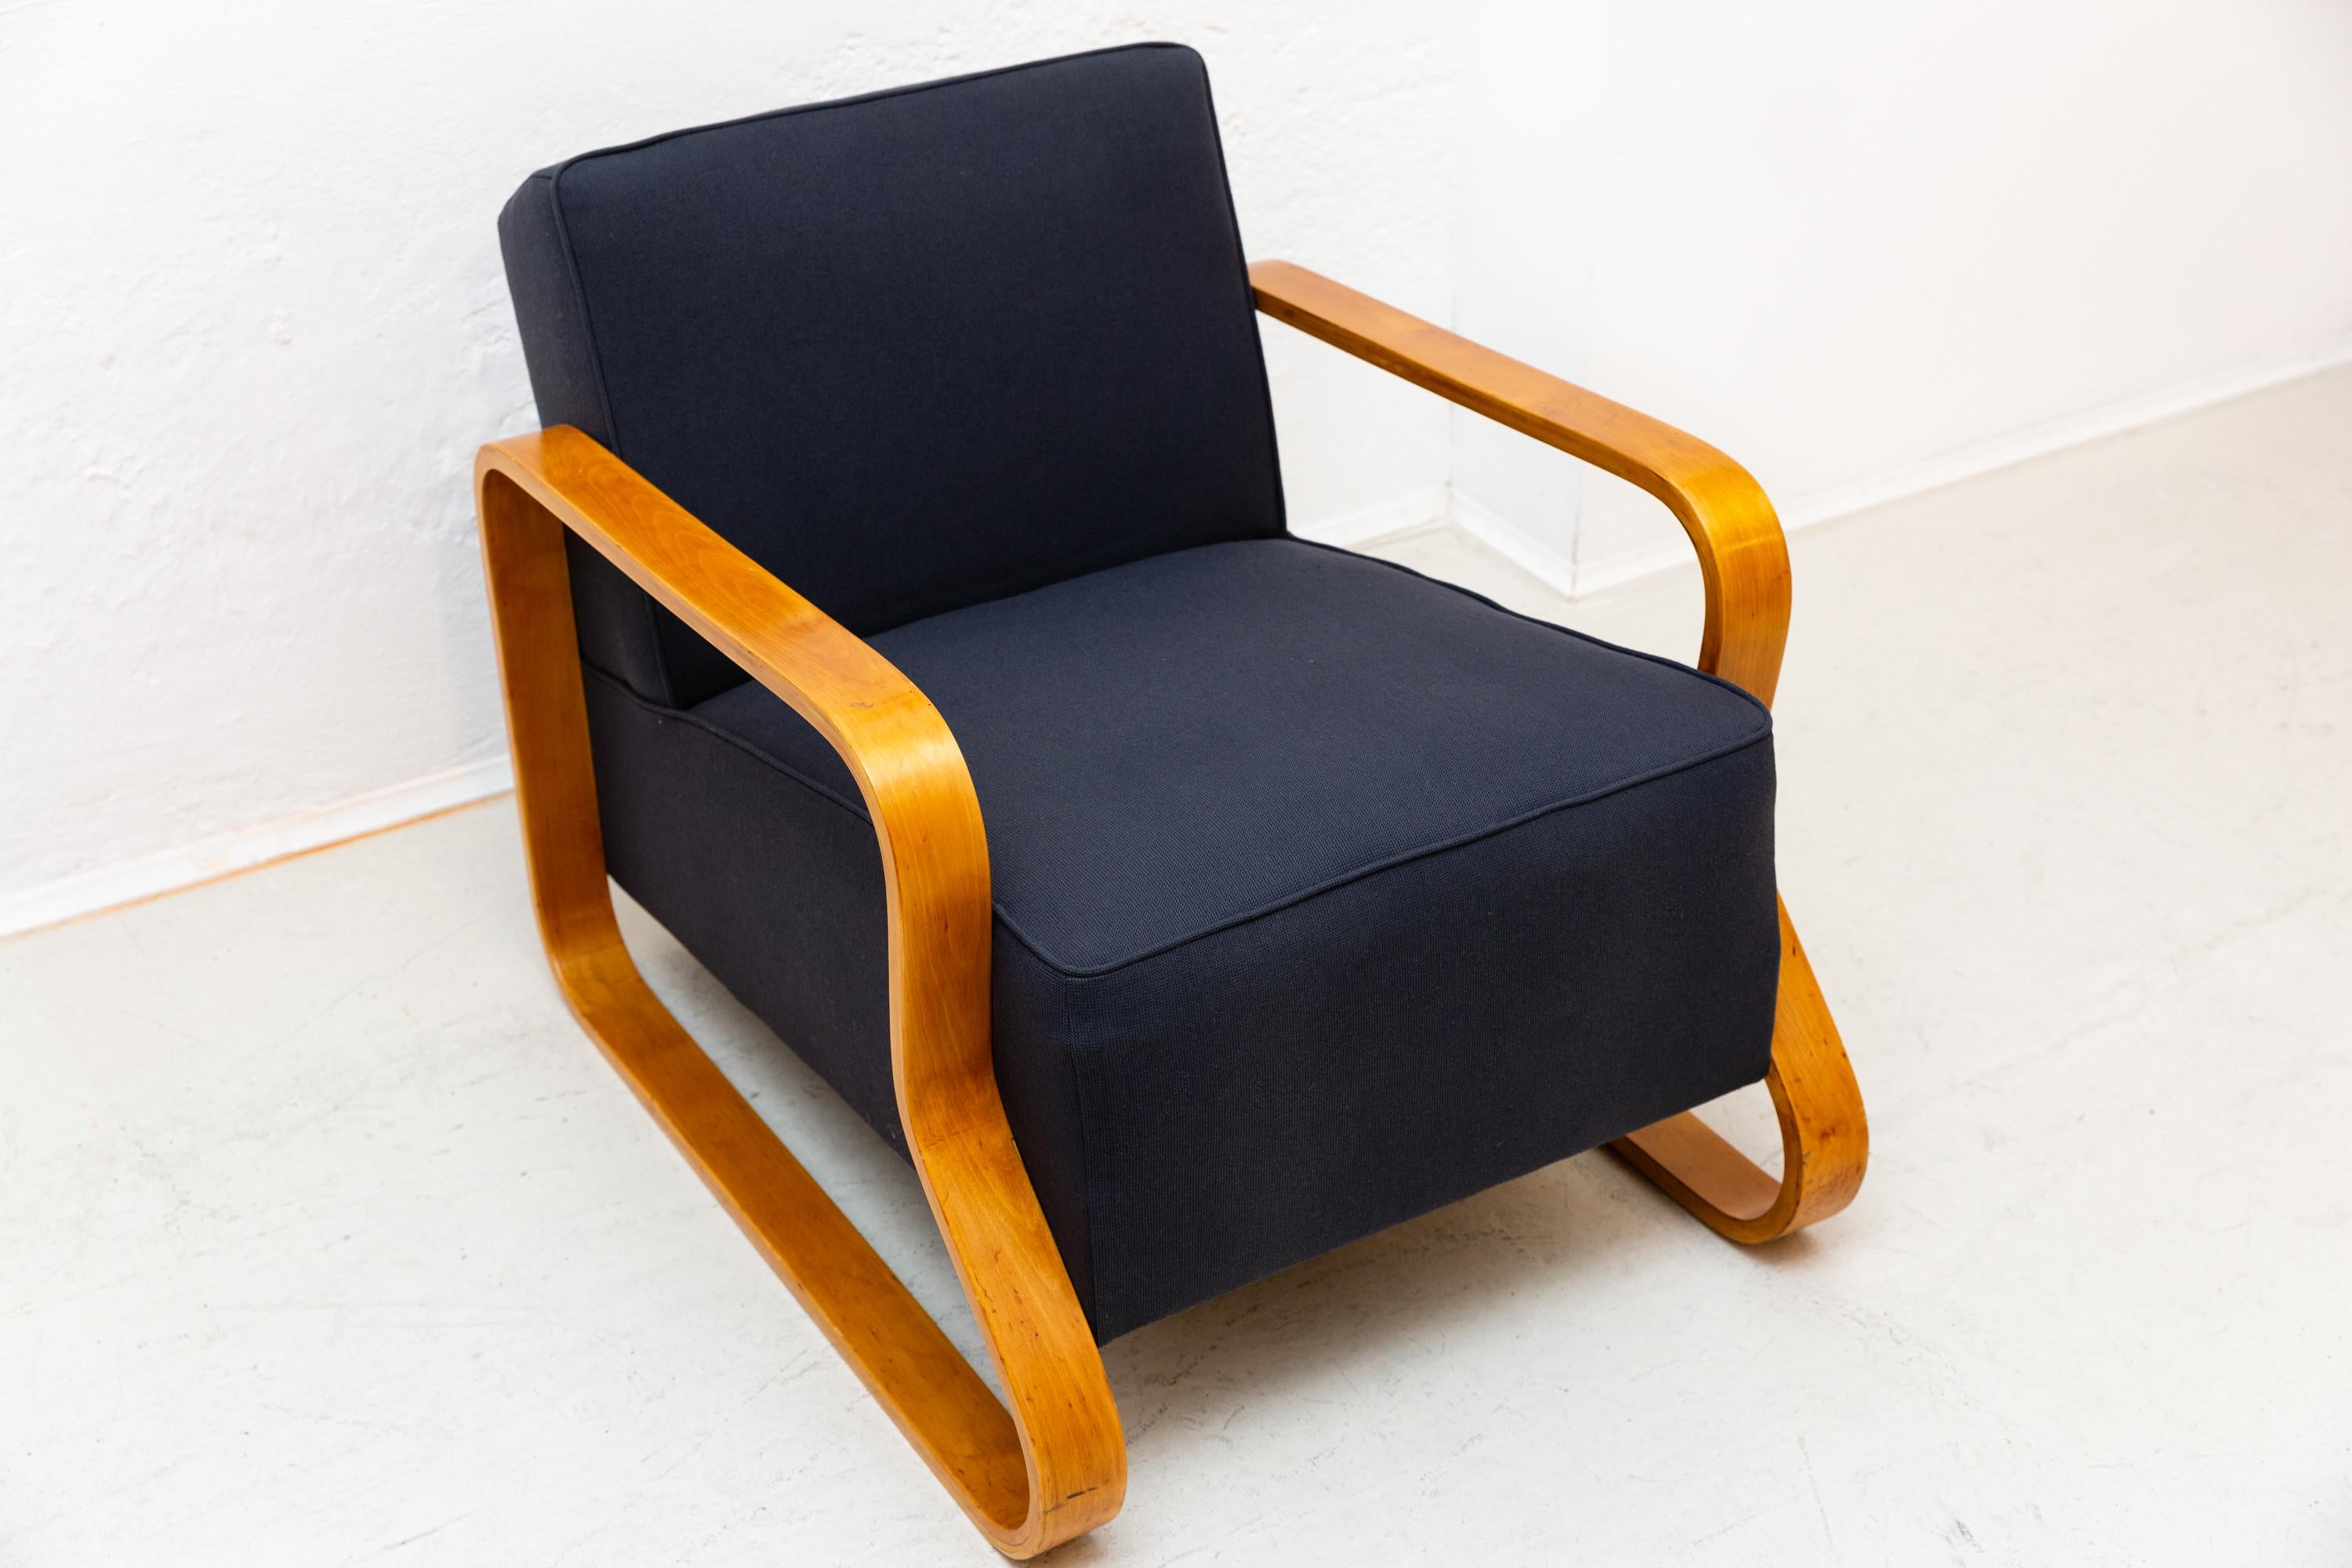 Alvar Aalto (1898-1976) Armchair, model 44, designed 1931-1932, manufactured by Finmar. Wooden frame construction with lacquered birch side panels, vintage spring upholstery, newly textile recovered, dark blue fabric cover. In a very good condition.